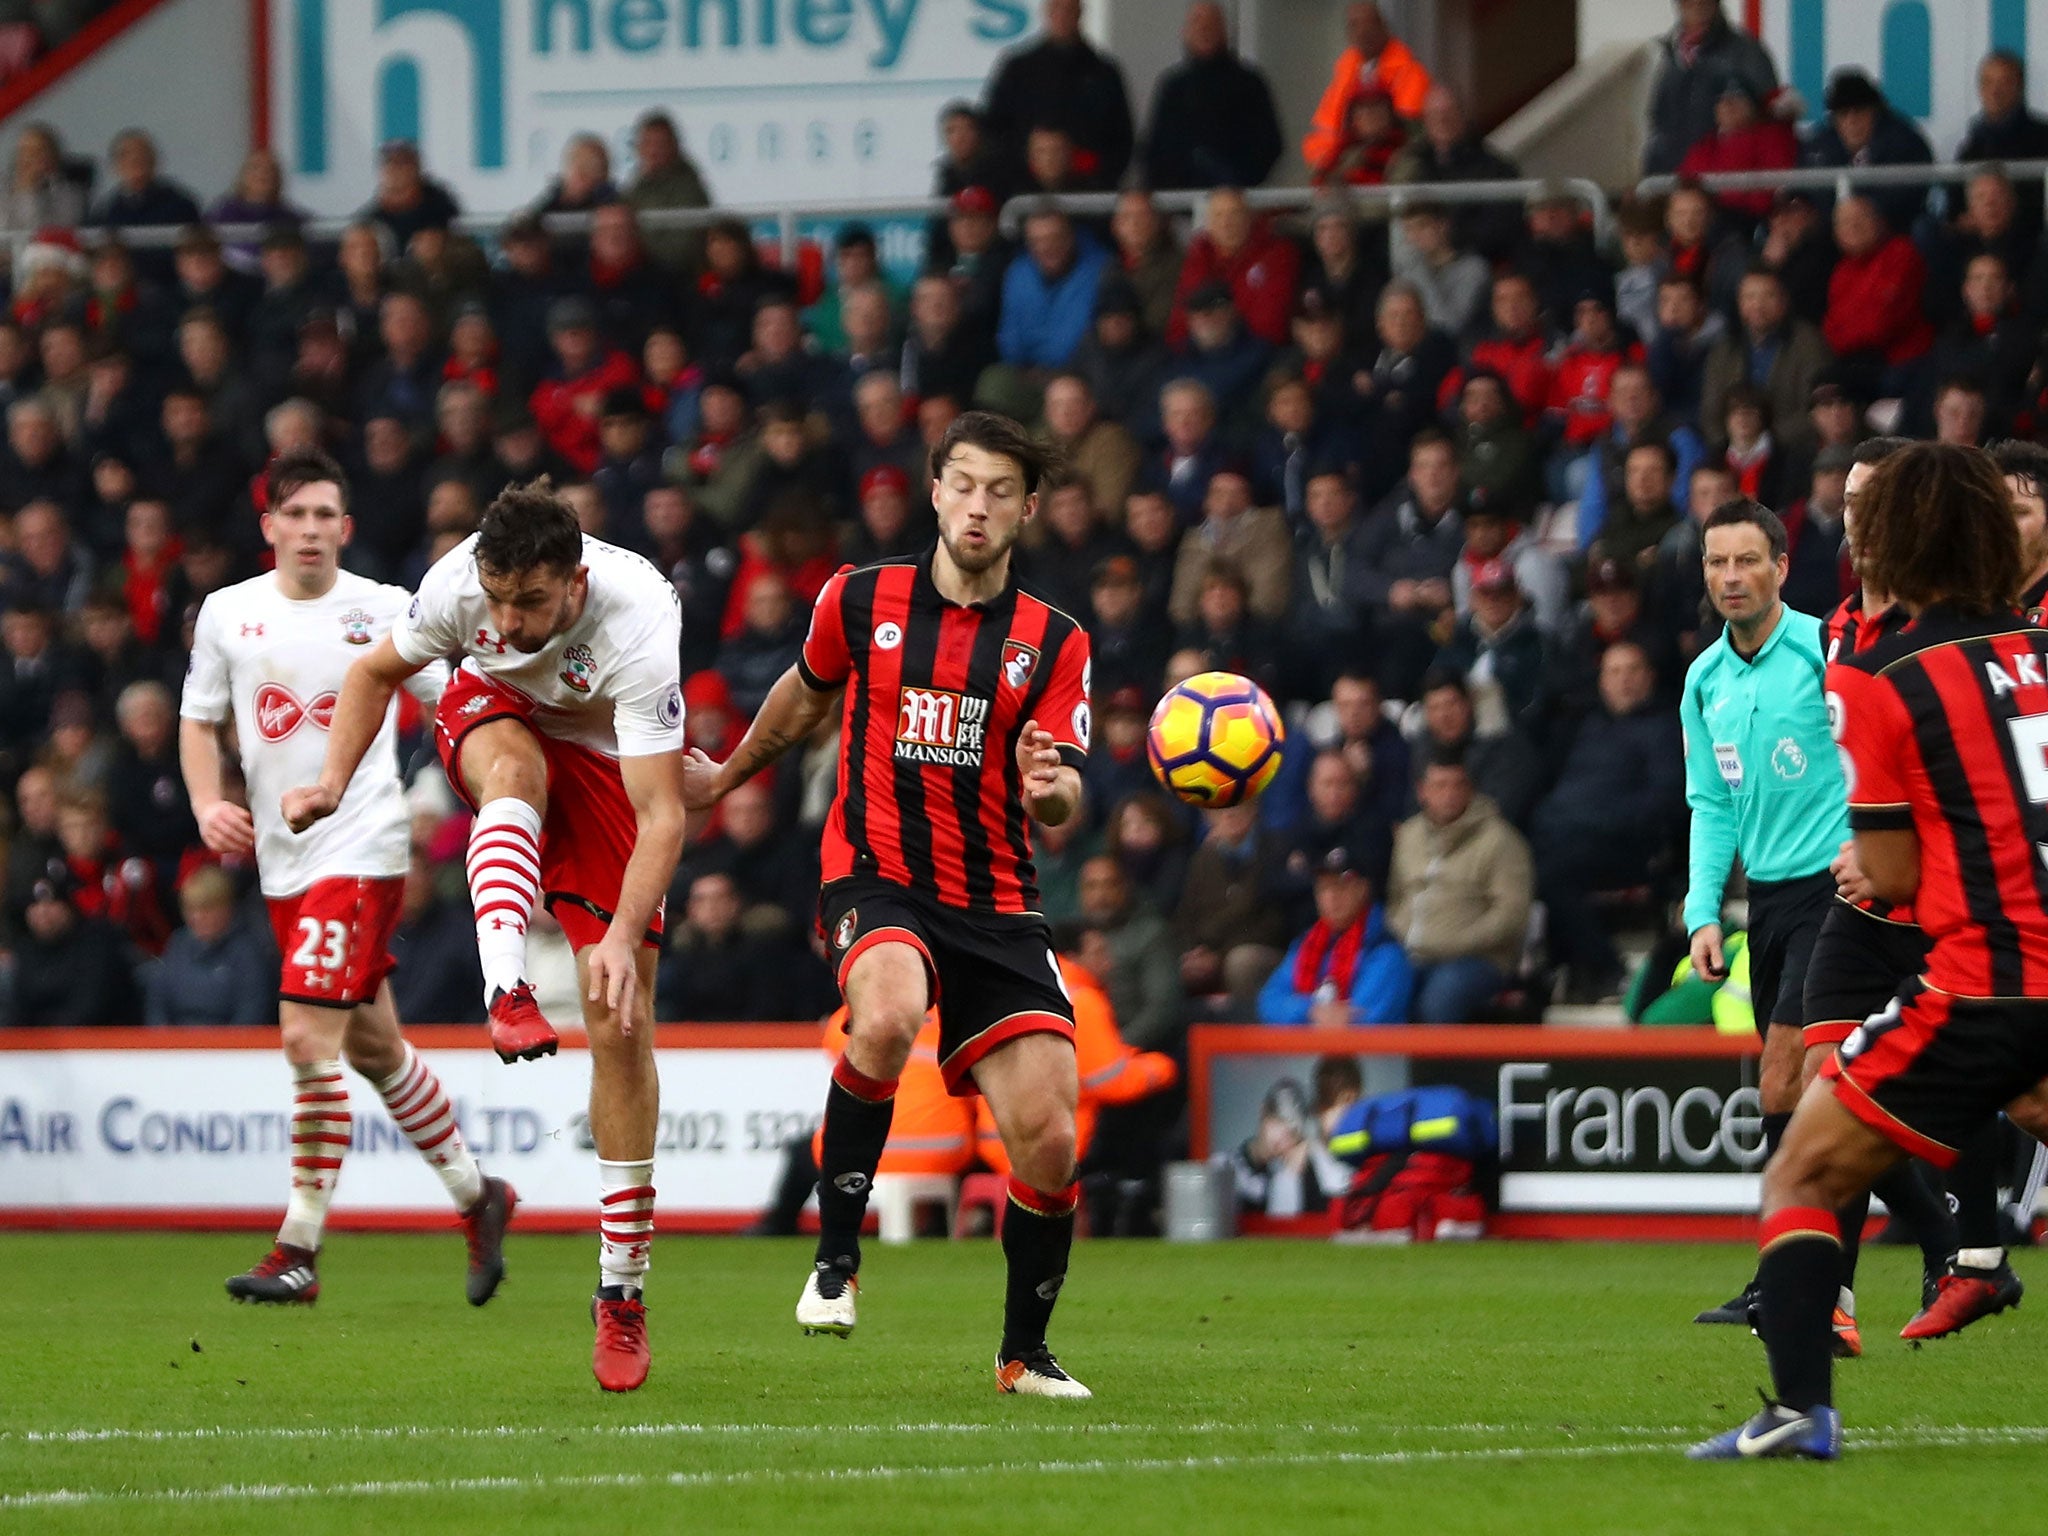 Jay Rodriguez fires in a volley to score his second and Southampton's third against Bournemouth